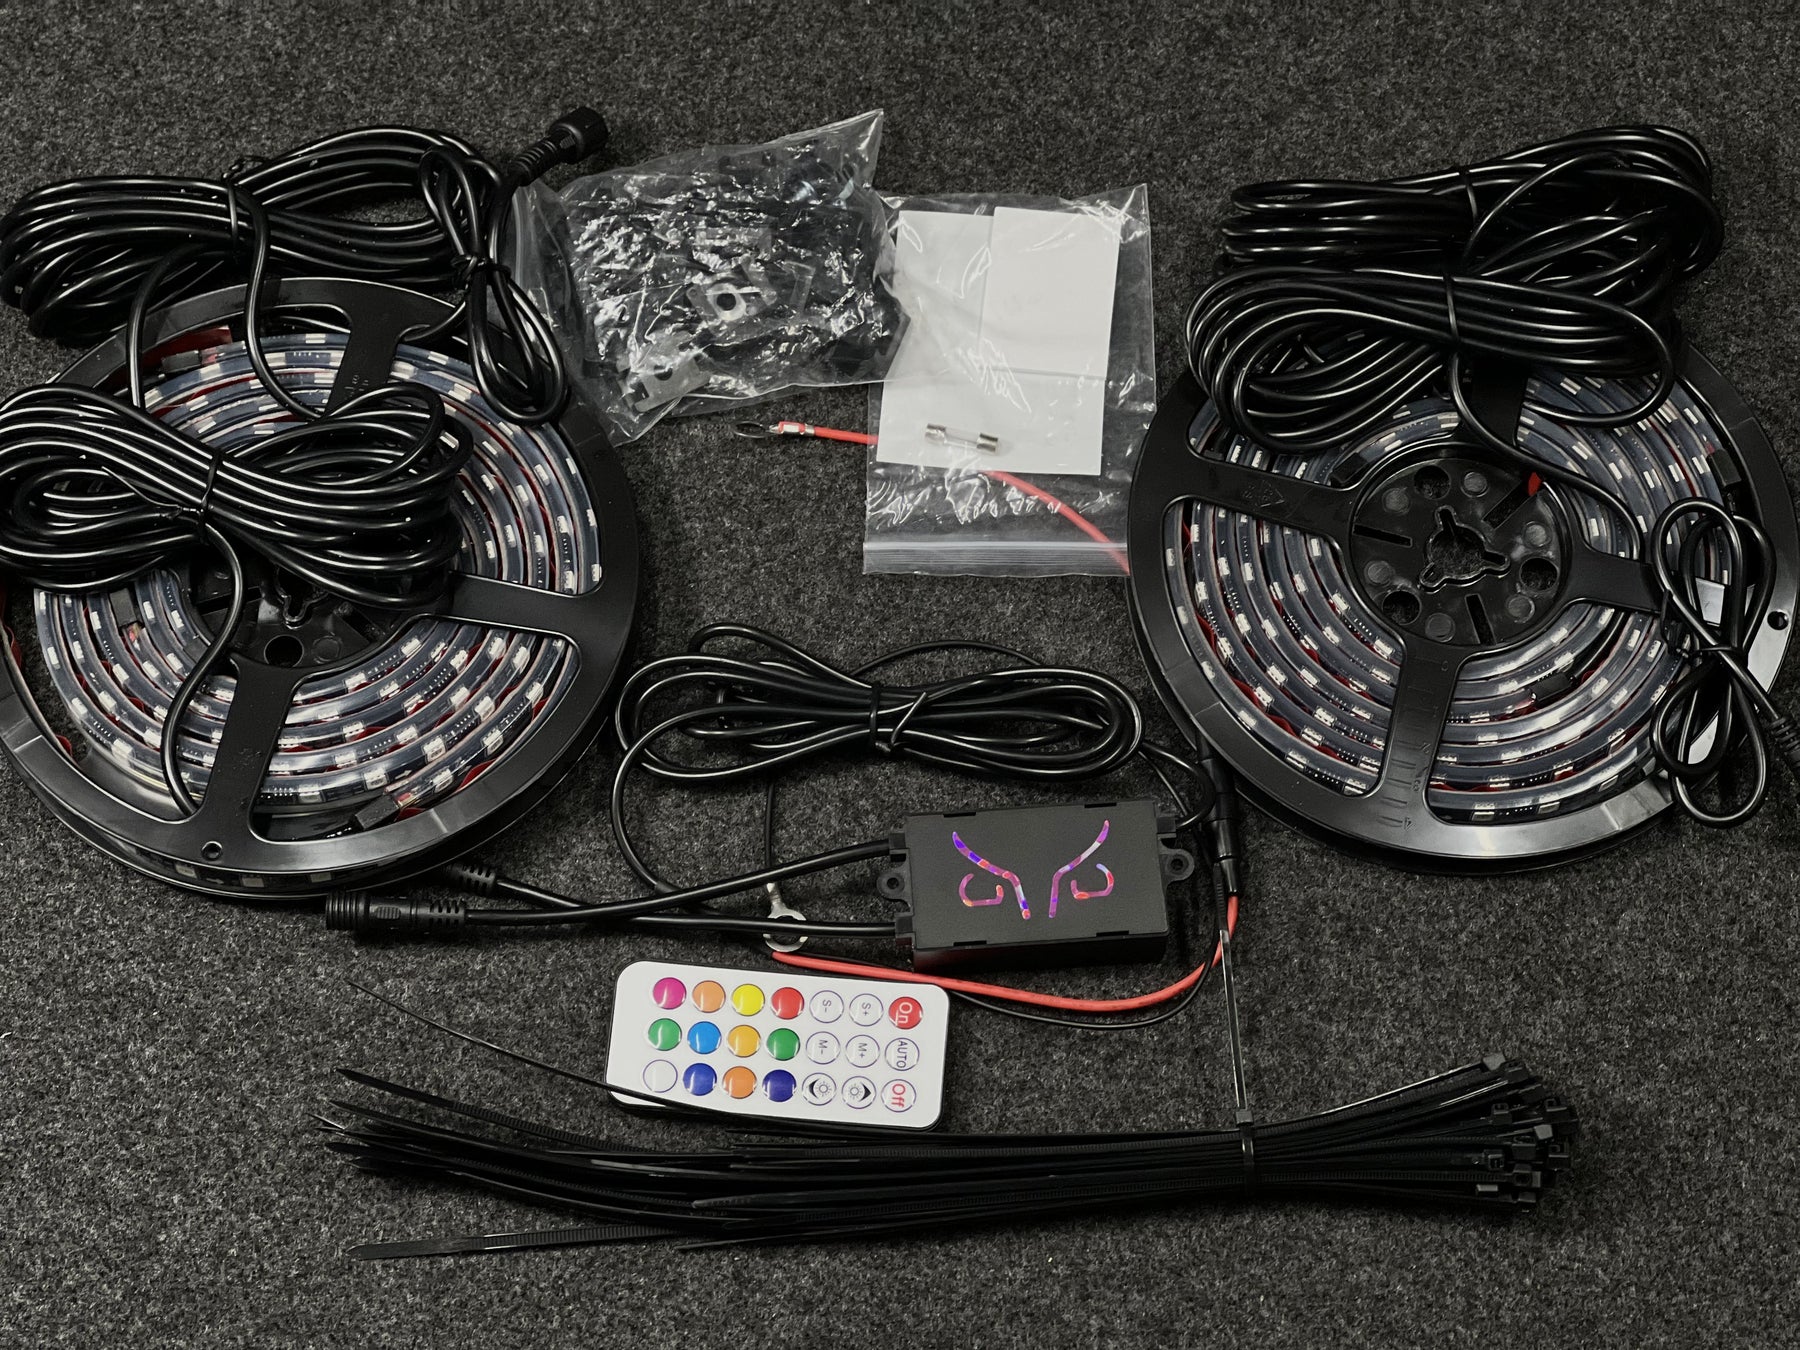 Kit led RGB sottoscocca – Andre lux